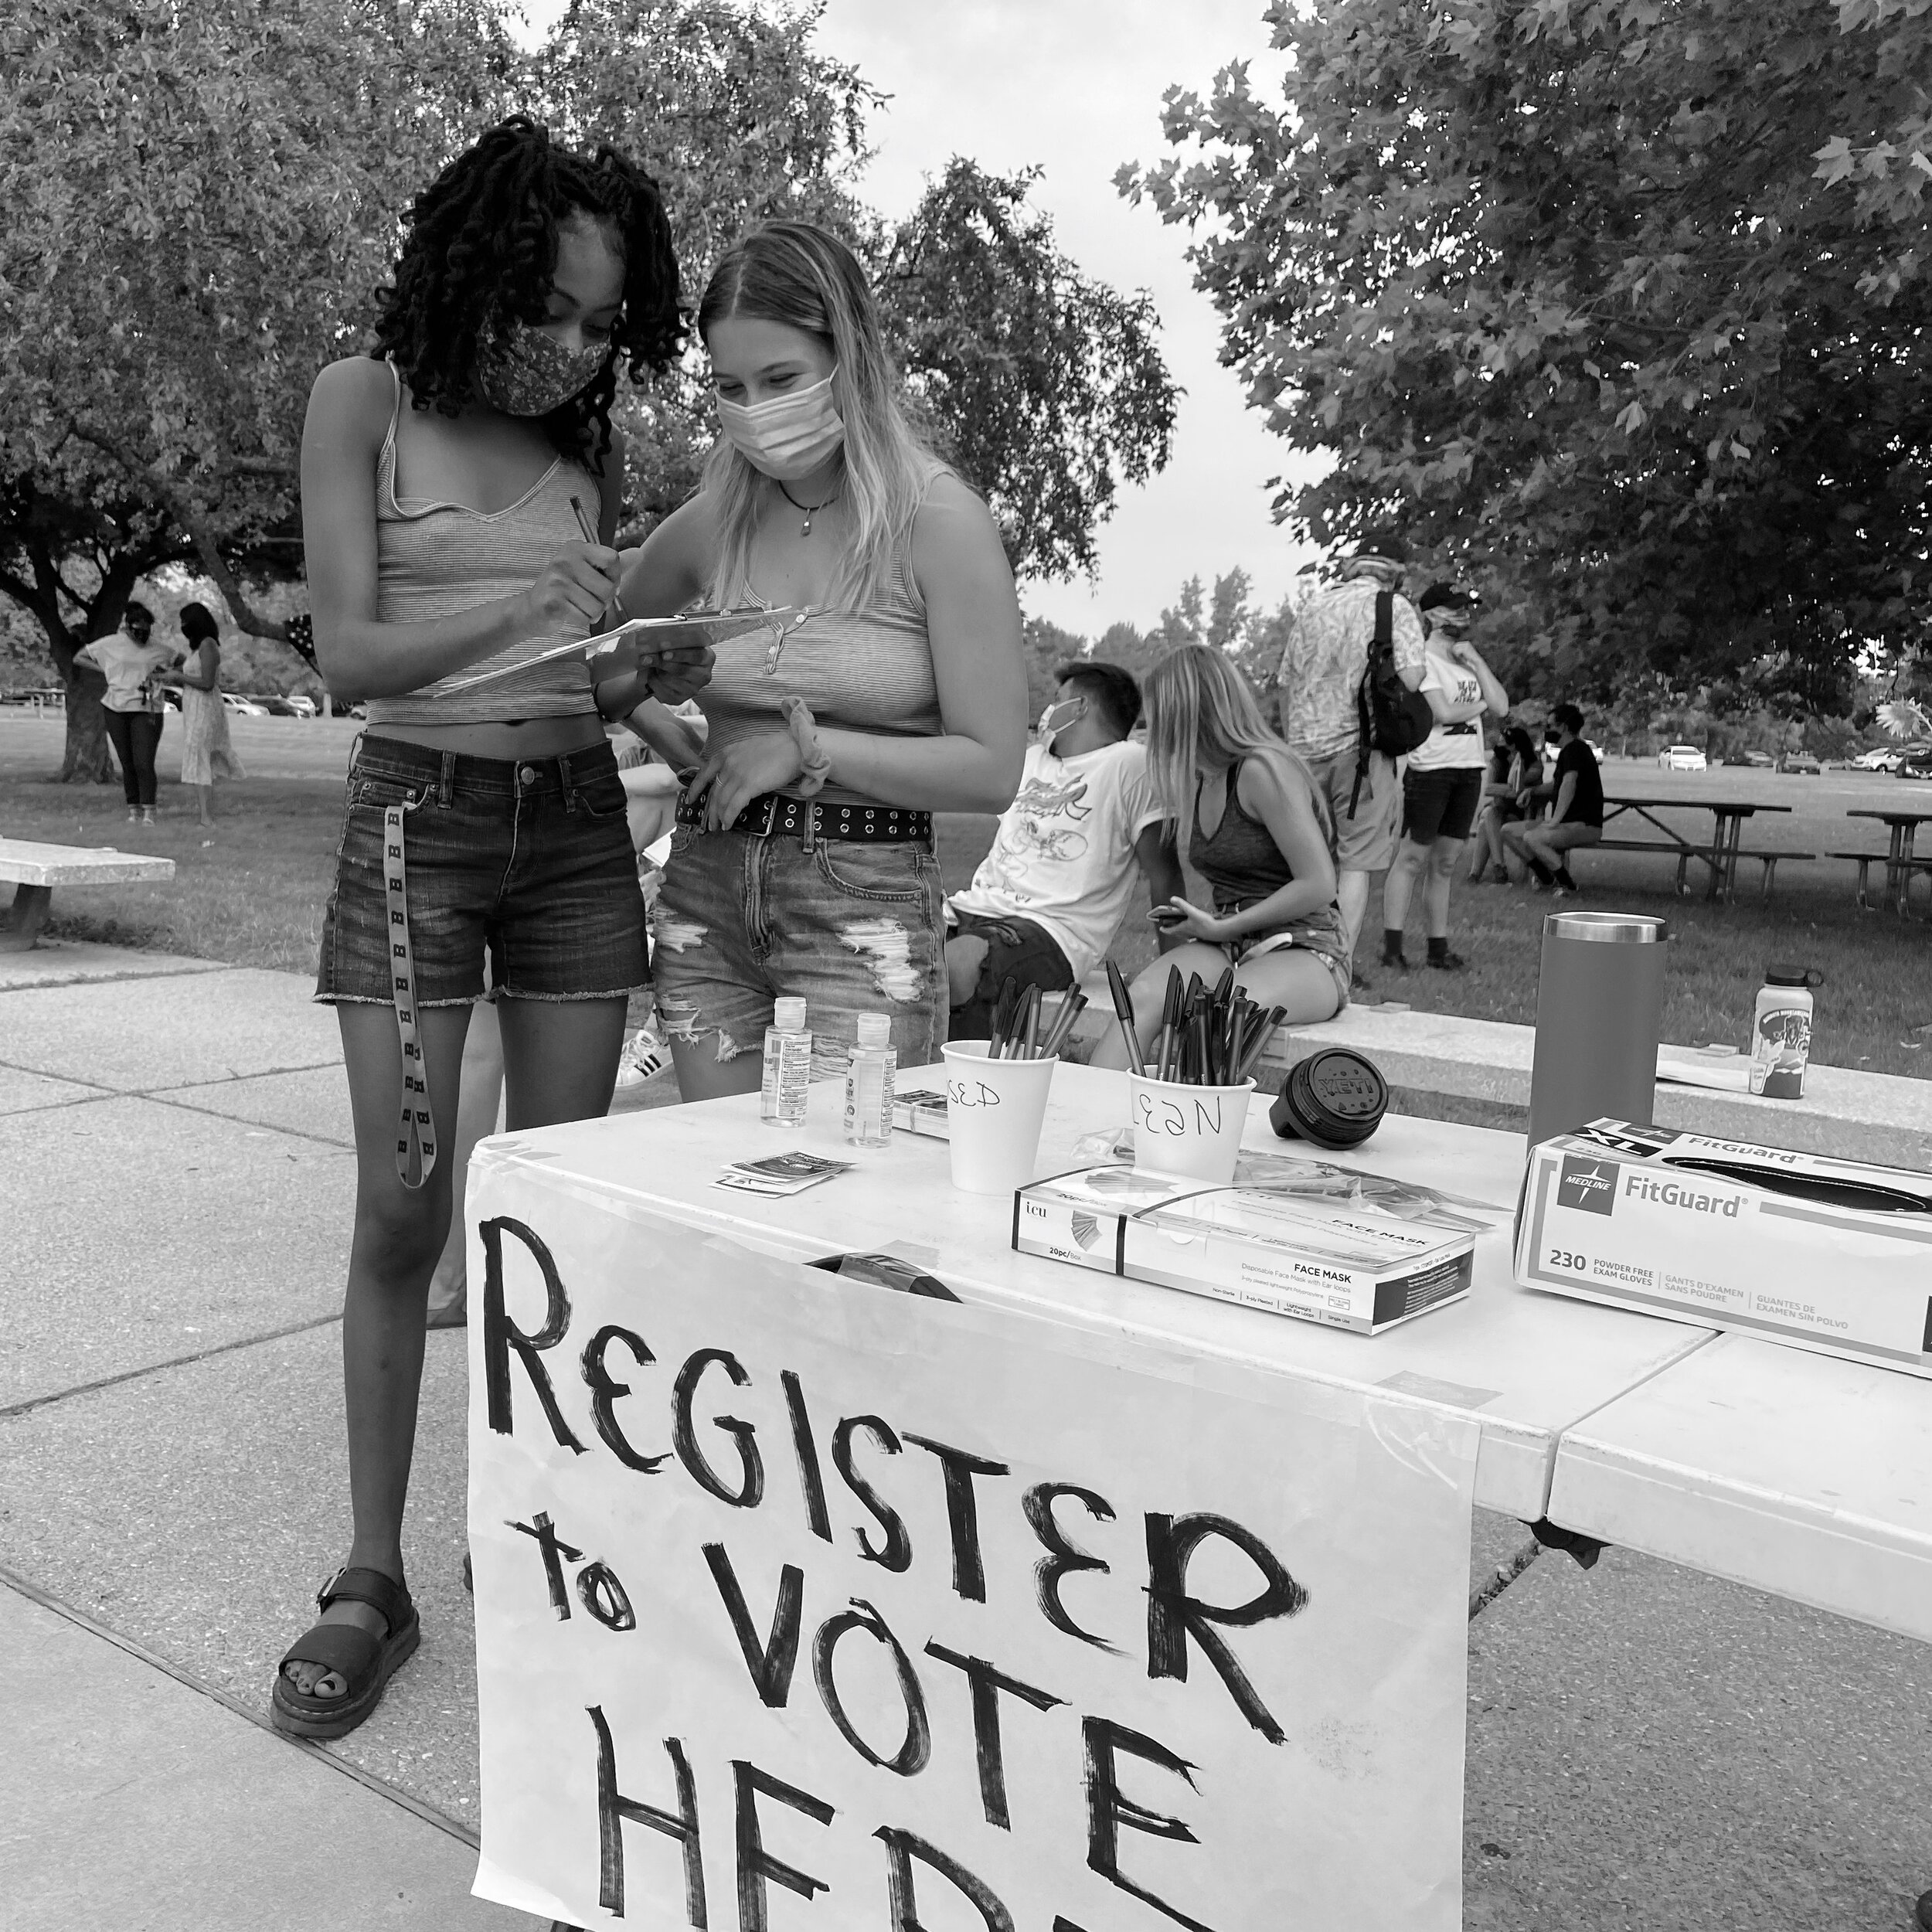 Get registered. Request your absentee ballot. Get informed. #BABEVOTE 